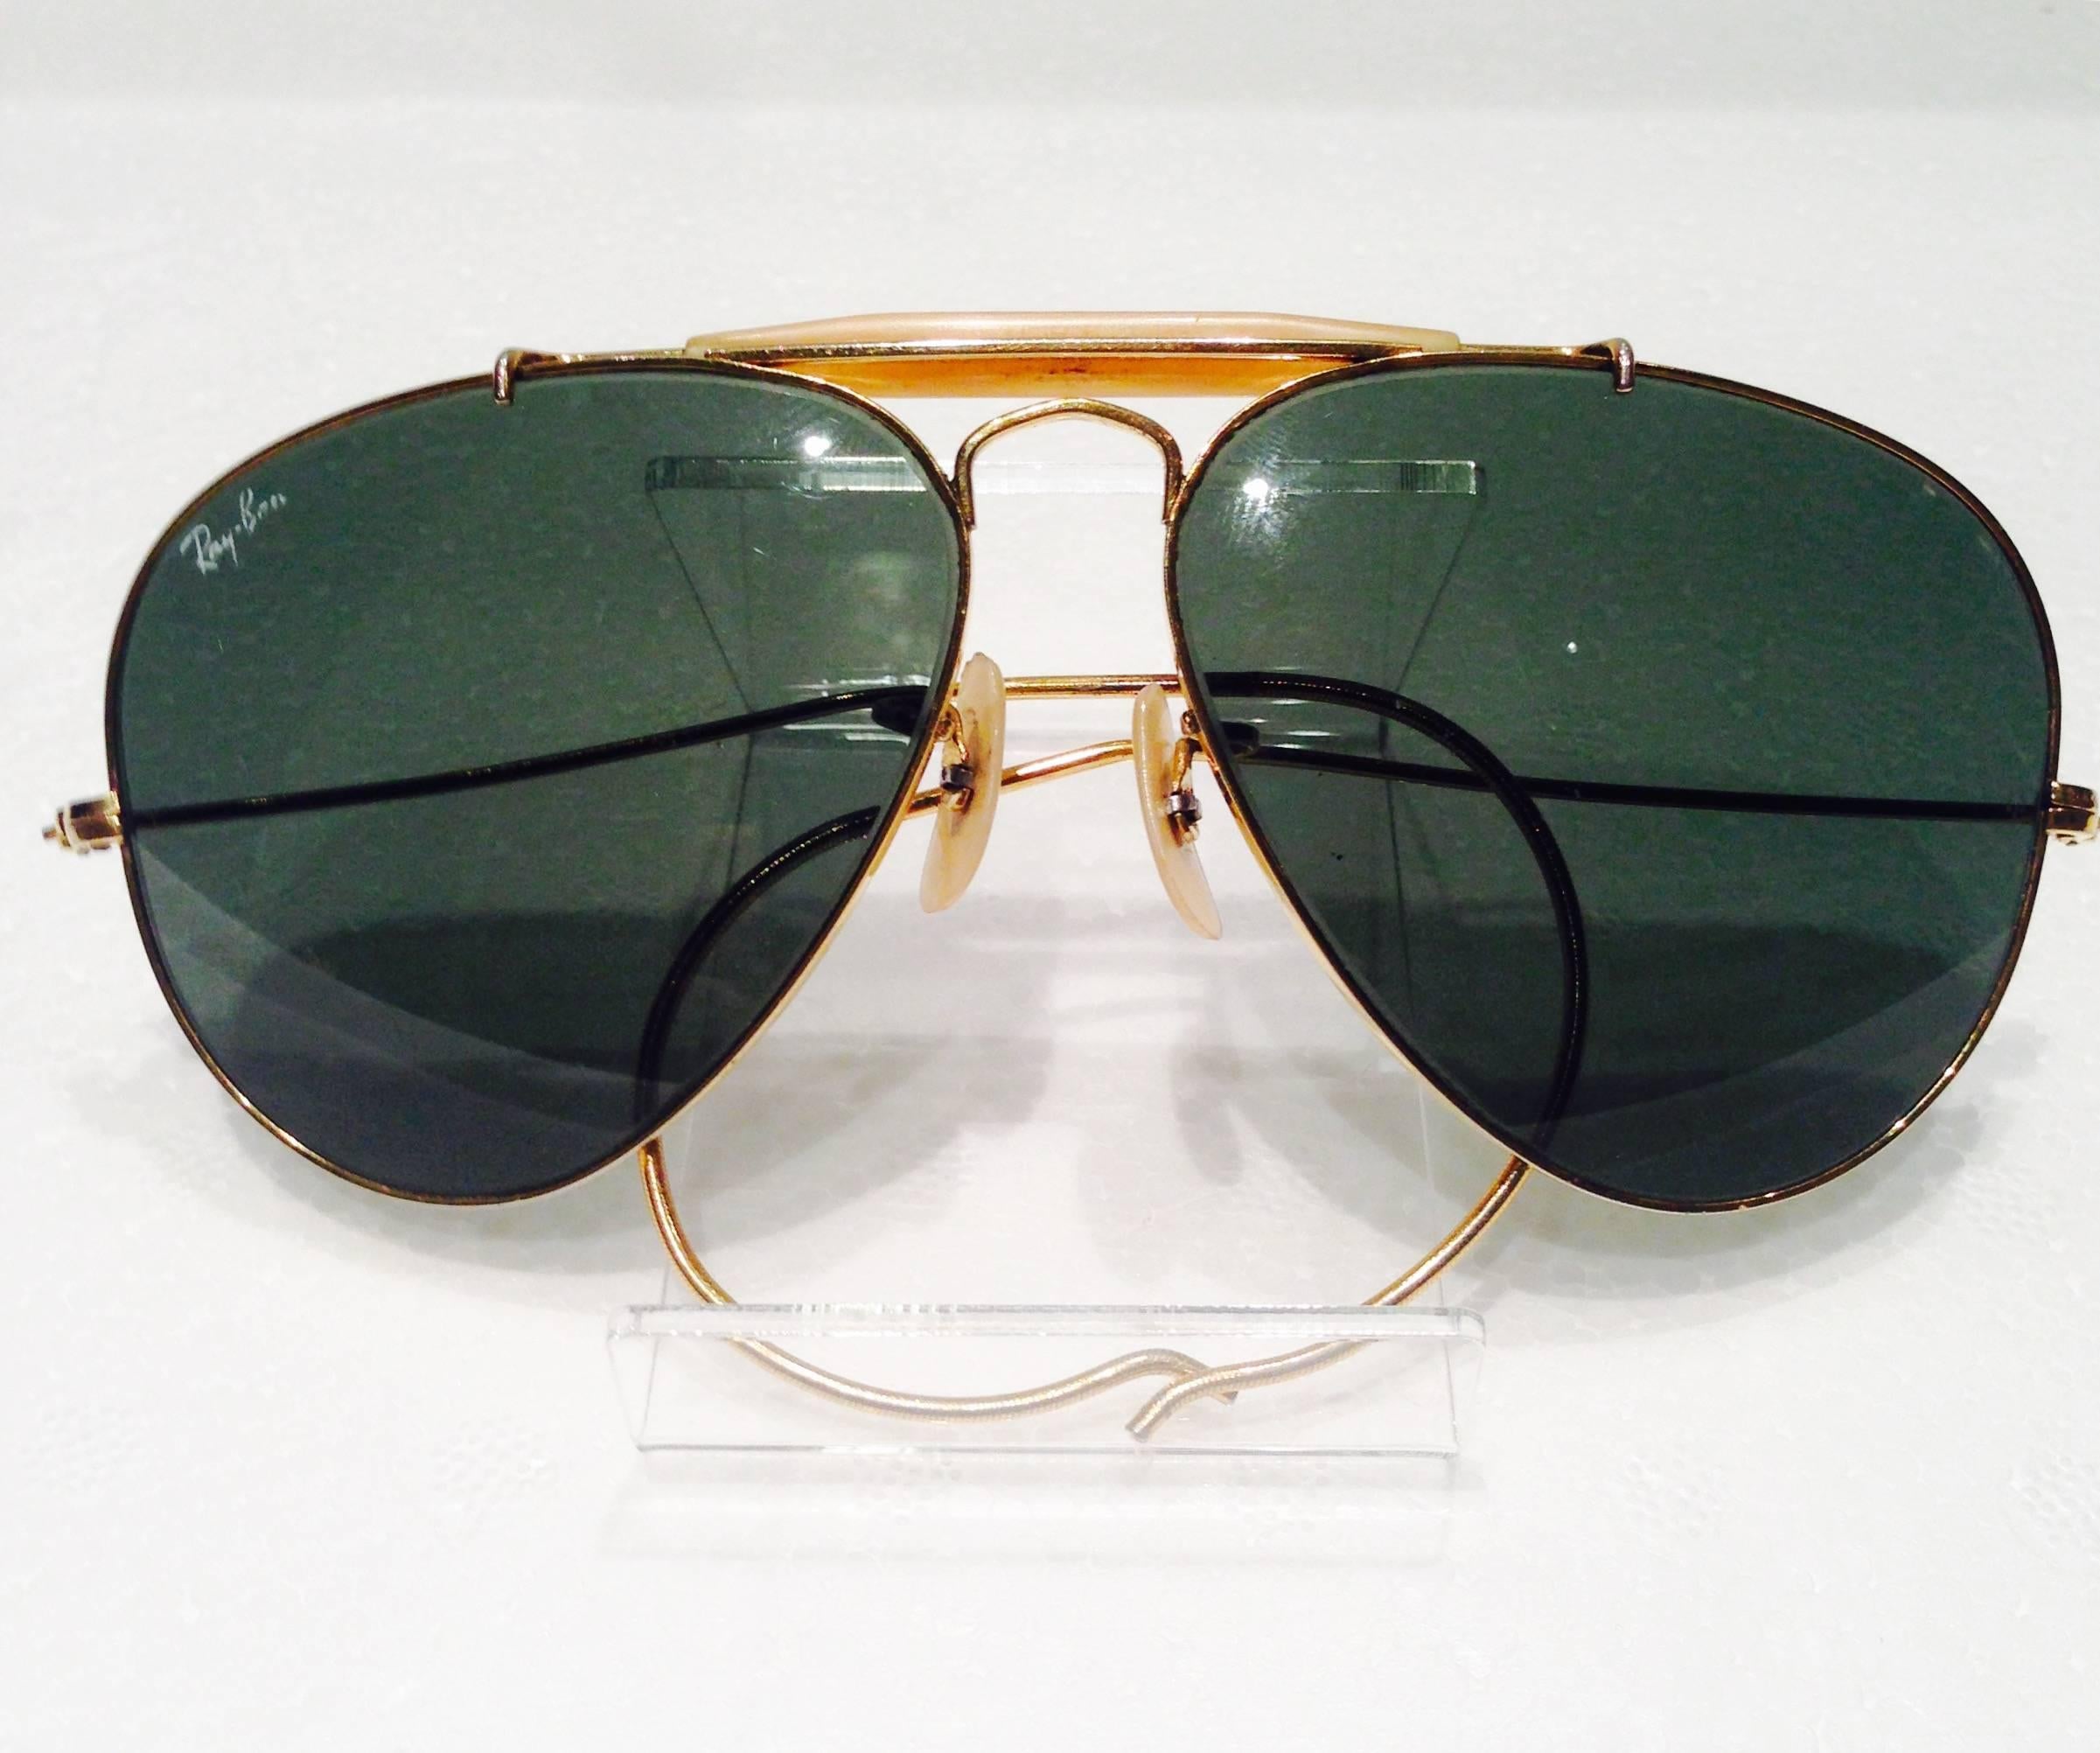 Rare 1960s Ray Ban by Bausch & Lomb gold plate with dark green UV protection lenses and the Ray Ban logo appearing on the upper left of the left lens. The dark green lenses are impact resistant glass. These Classic aviator 